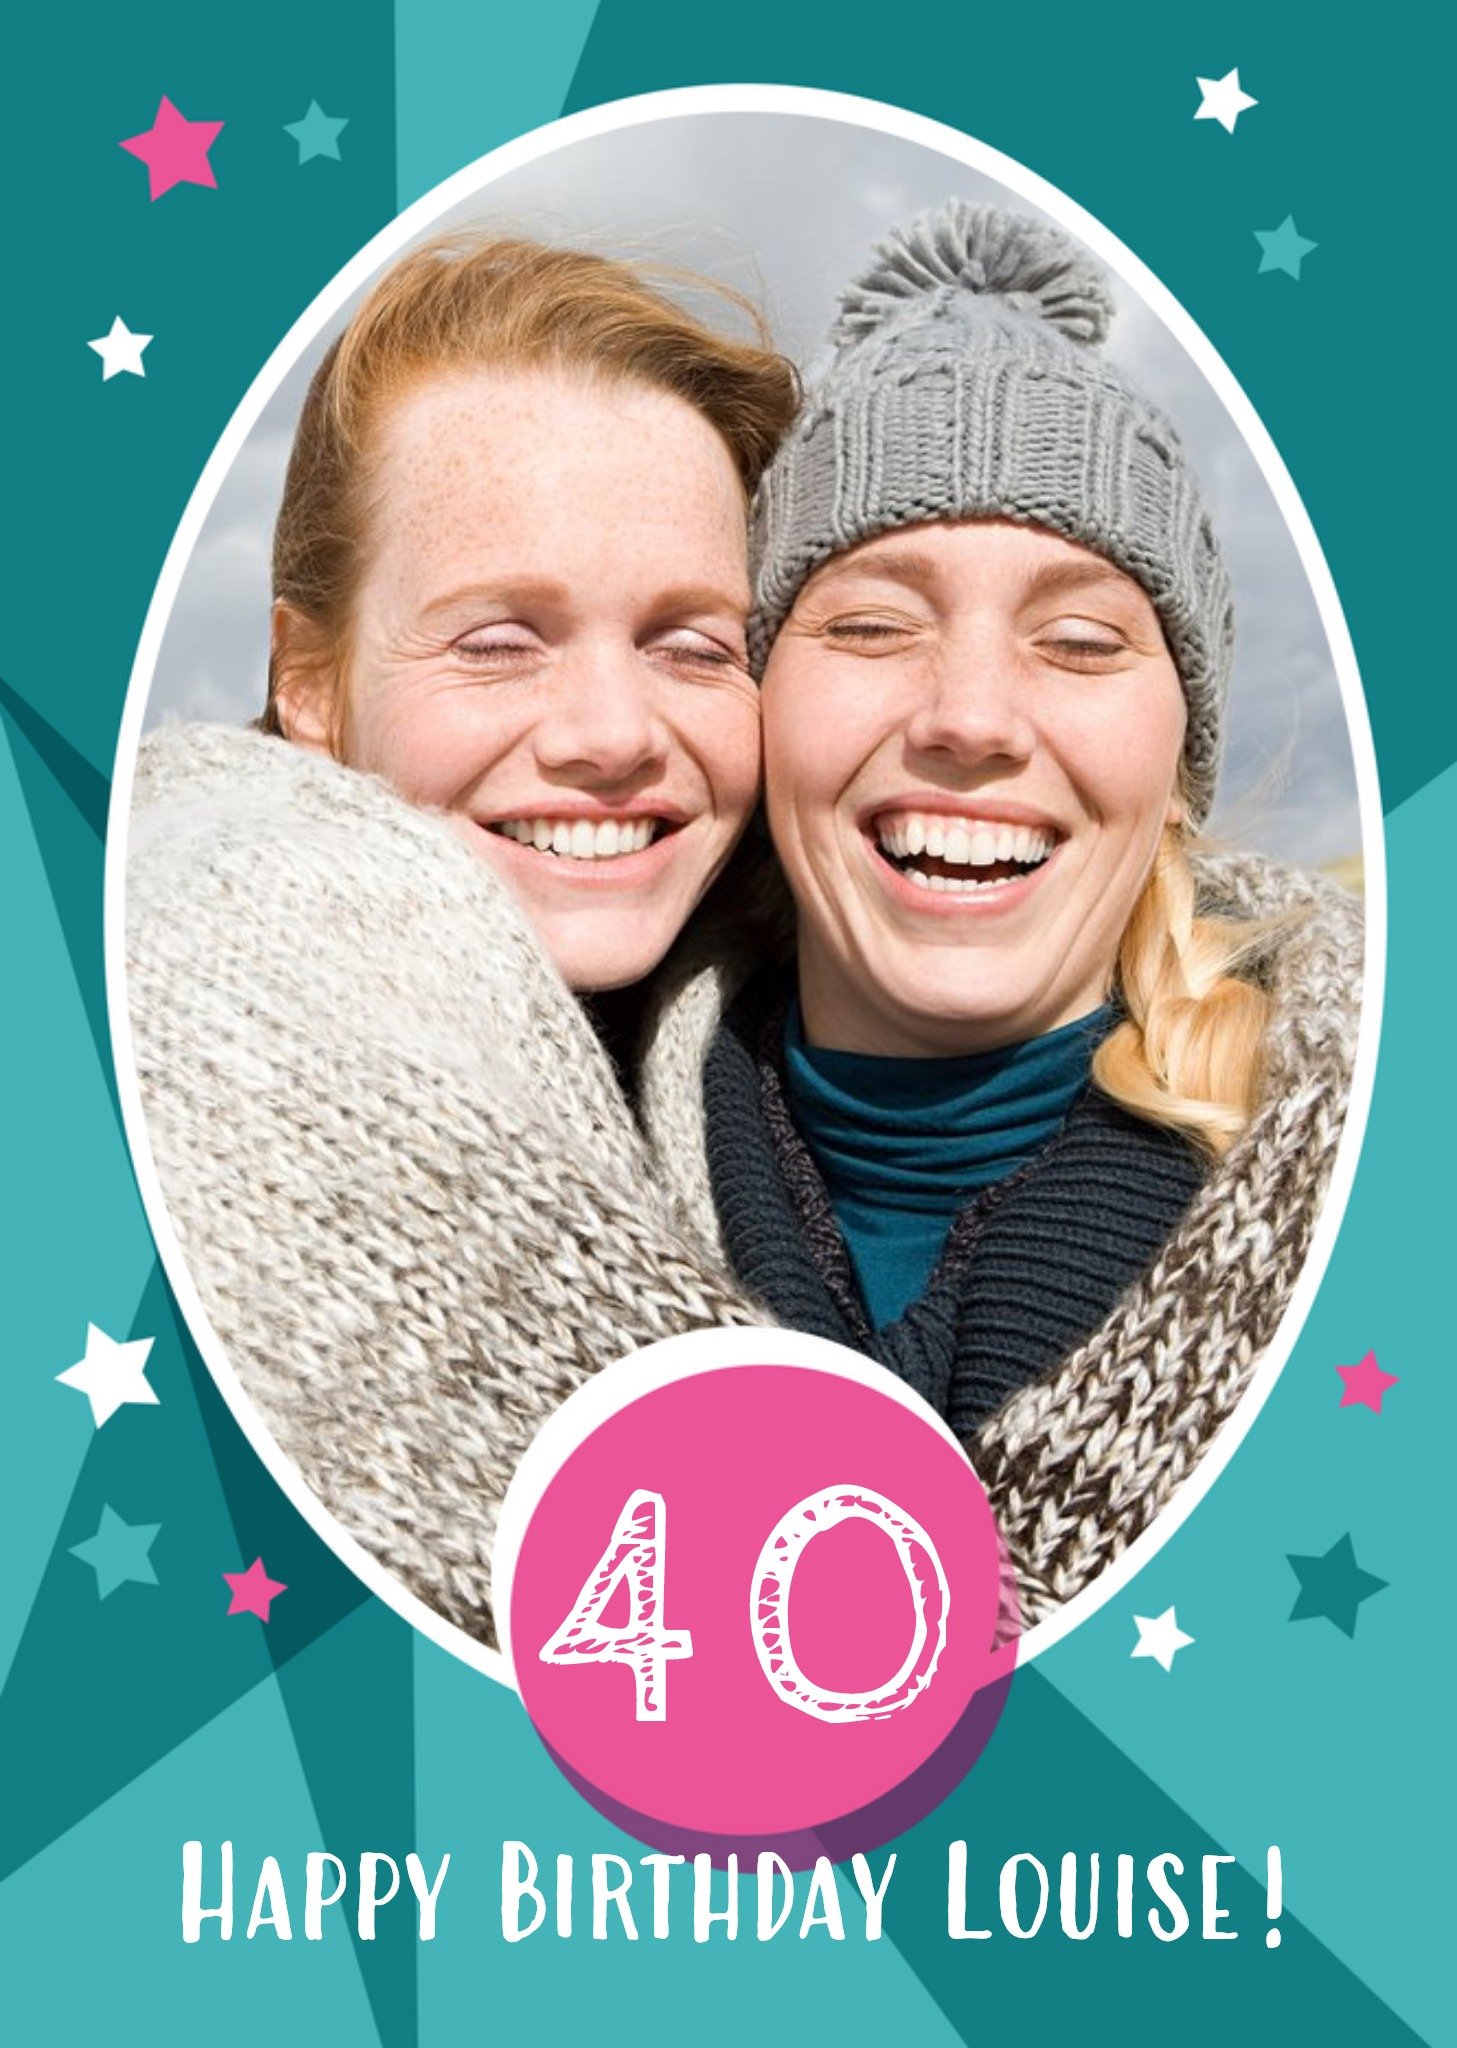 Moonpig Photo 40th Birthday Cards - Use Your Own Photos To Create A Customised Birthday Card, Large